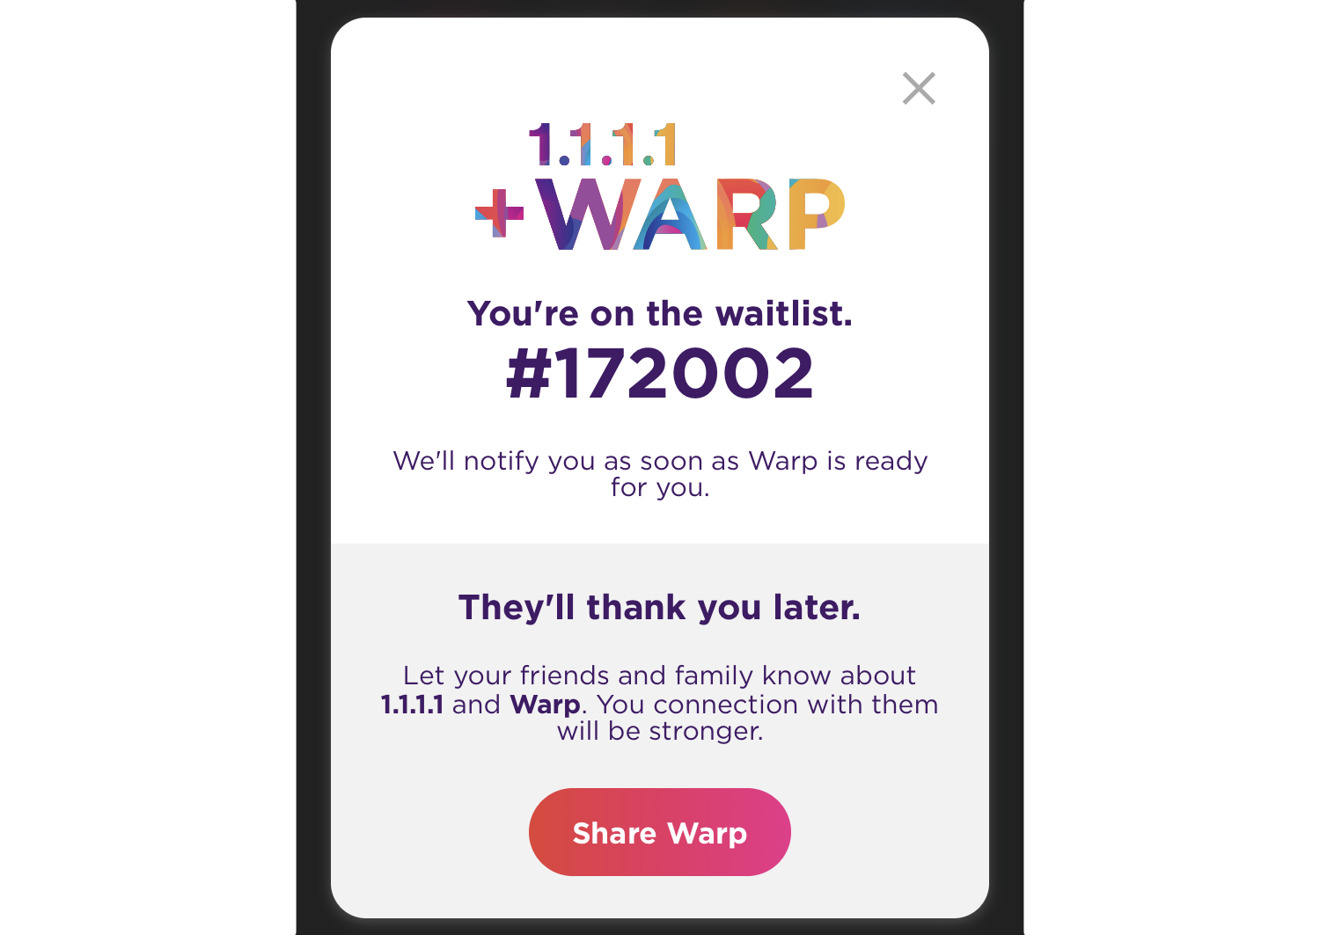 The confirmation page for the 1.1.1.1+Warp waitlist within the iOS app